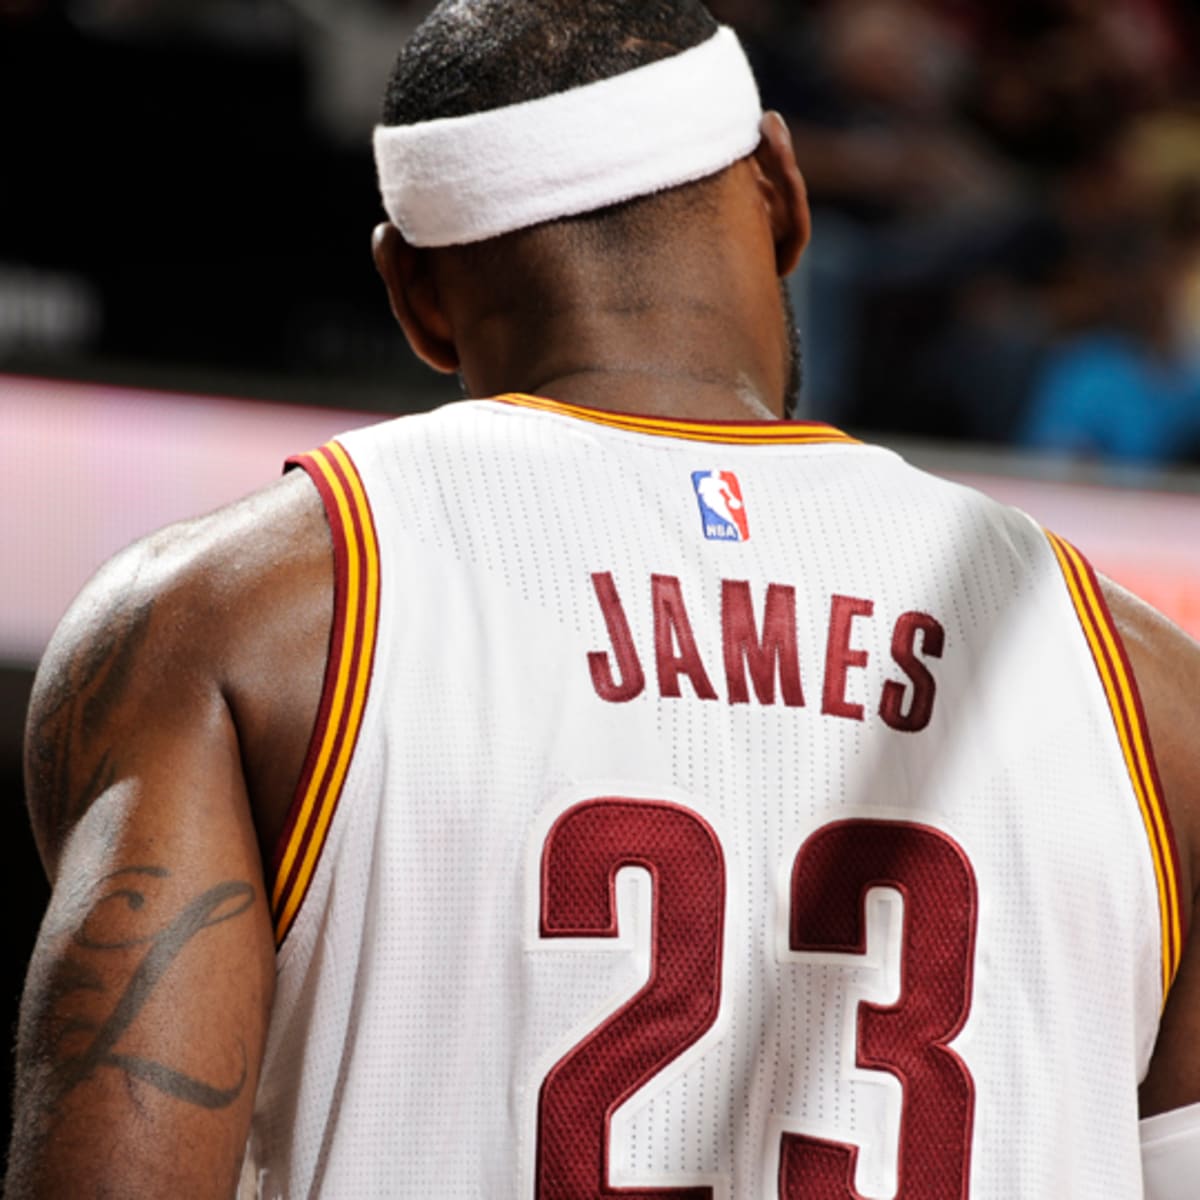 Heat's LeBron James No. 1 in NBA jersey sales - Sports Illustrated